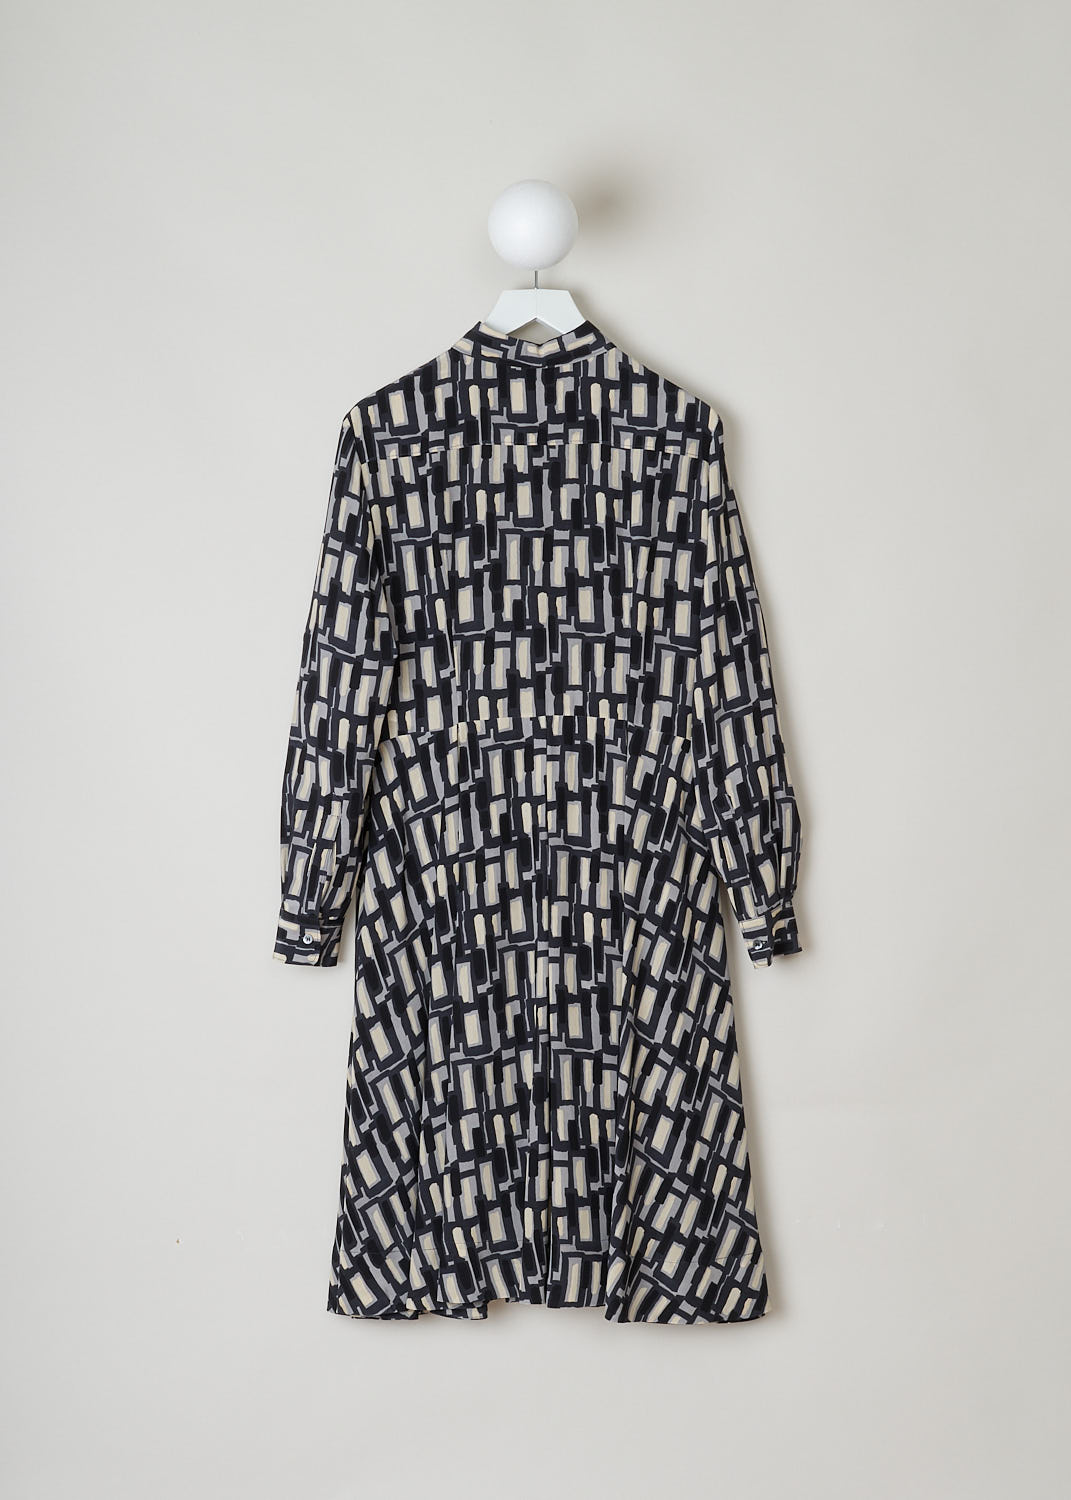 ASPESI, SILK PRINTED MIDI DRESS, 2938_V126_66173, Print, Back, This long sleeve dress has a geometric print in black, grey and off-white hues. The dress features a pointed collar, a row of button up to the waistband, concealed slanted pockets and a pleated skirt that reaches to below the knee. 

